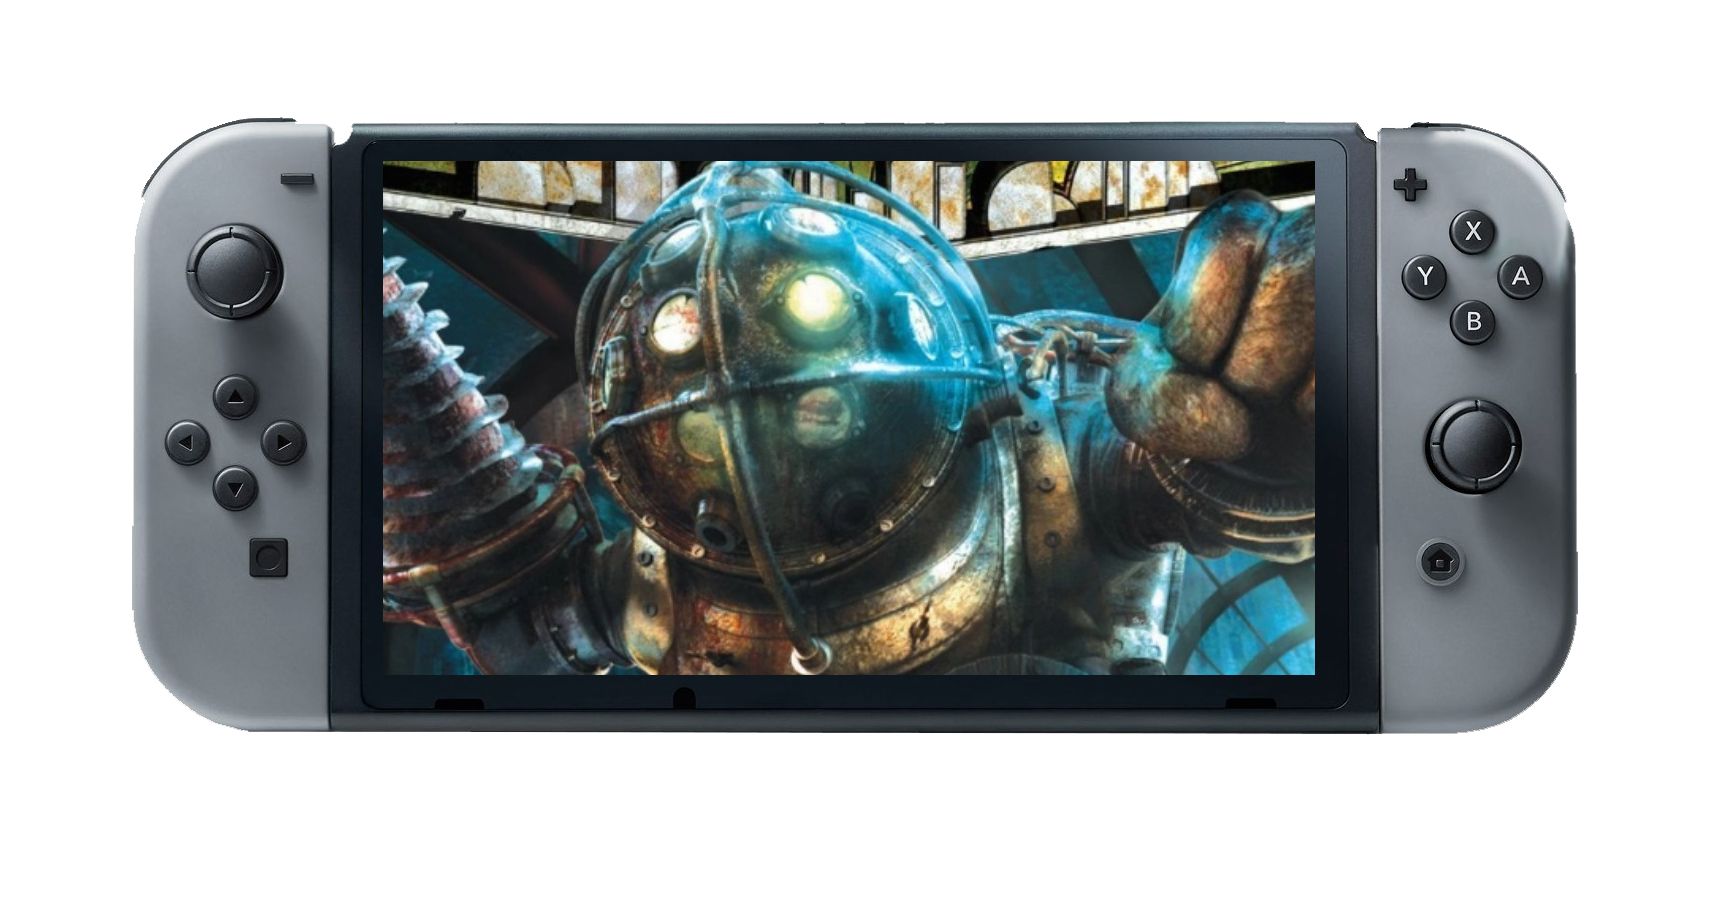 download bioshock the collection nintendo switch for free